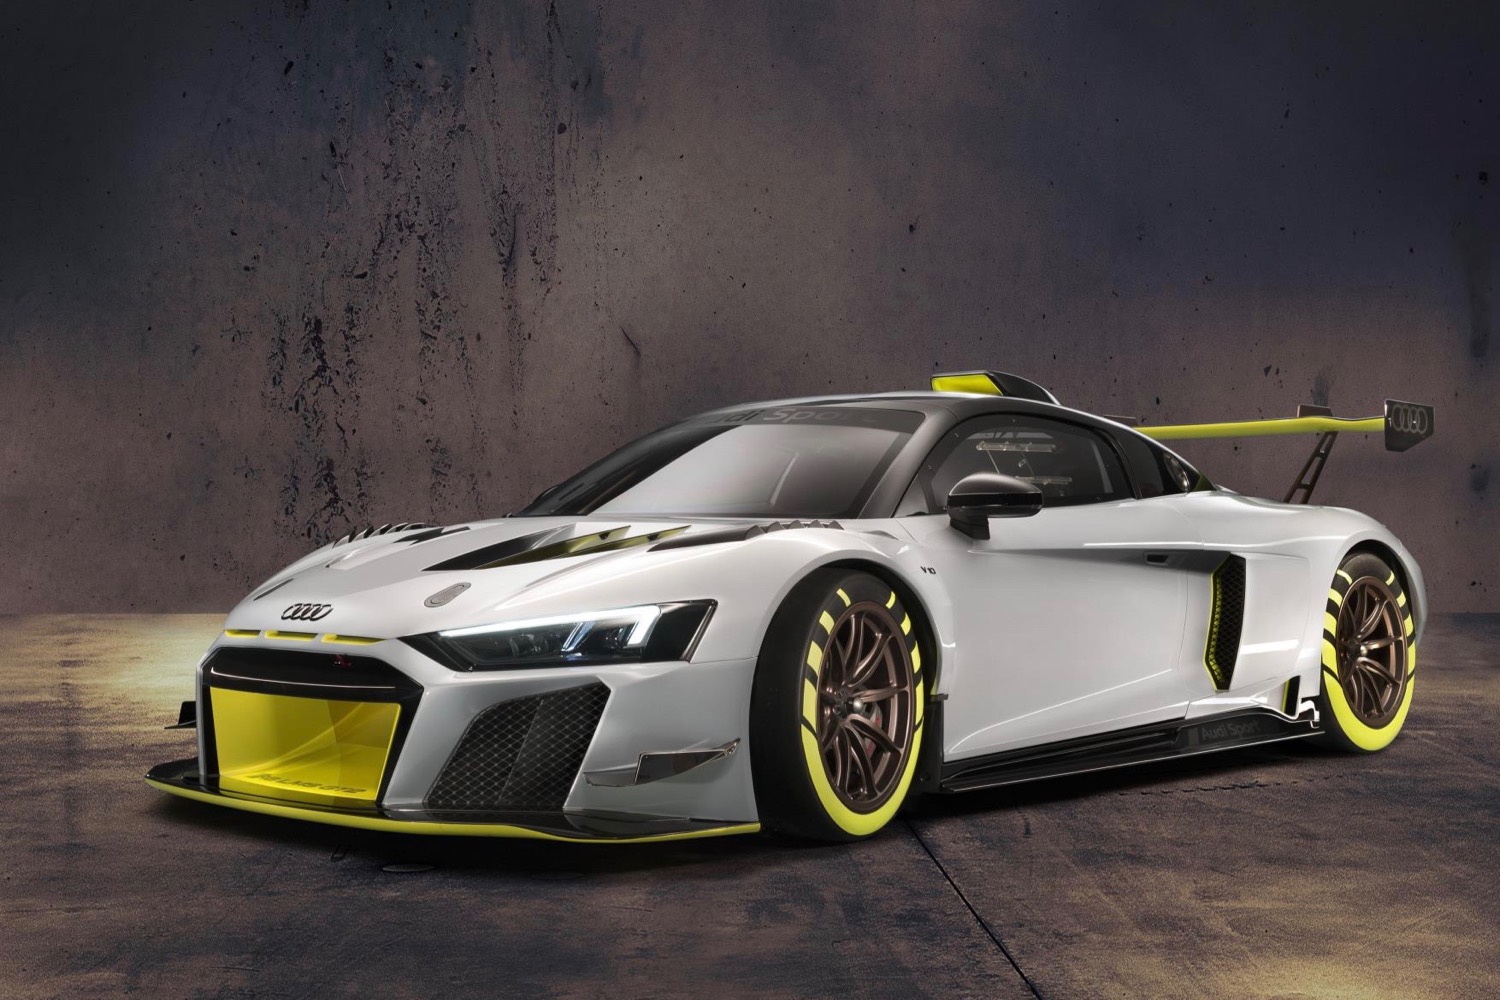 Audi R8 LMS GT2 Unveiled at 2019 Goodwood Festival of Speed Digital Trends image photo pic